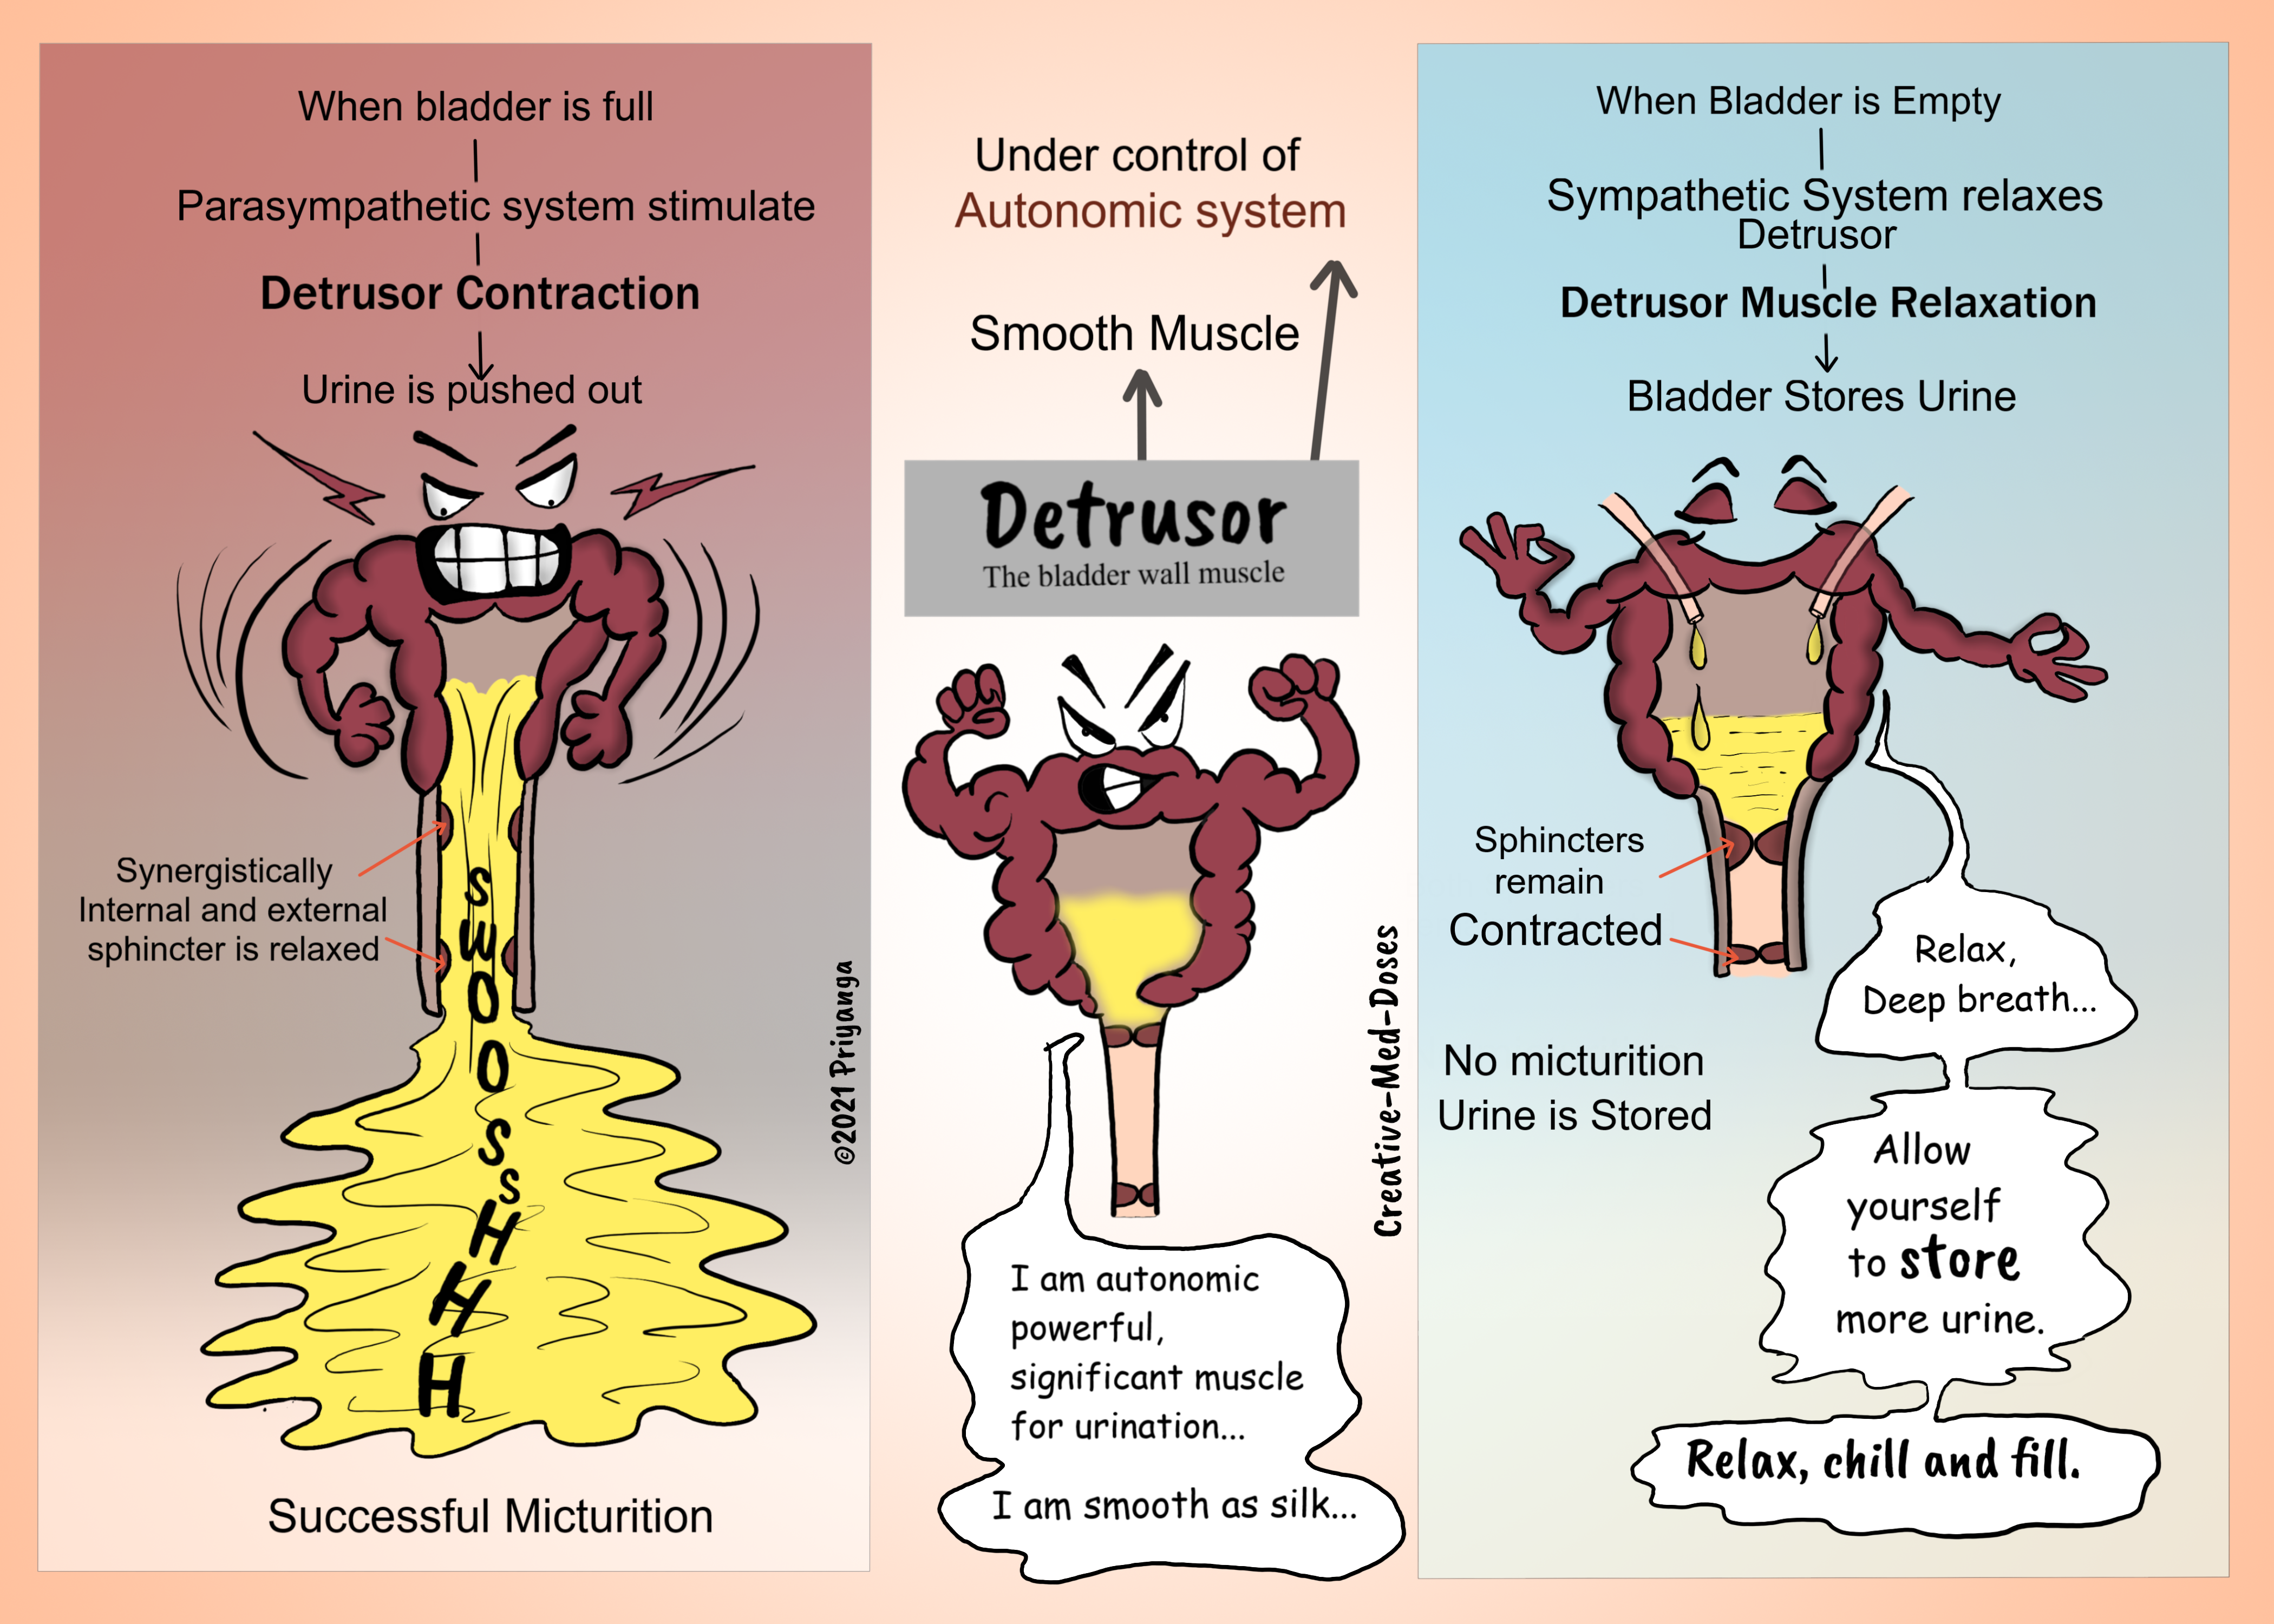 Detrusor: the bladder wall muscle